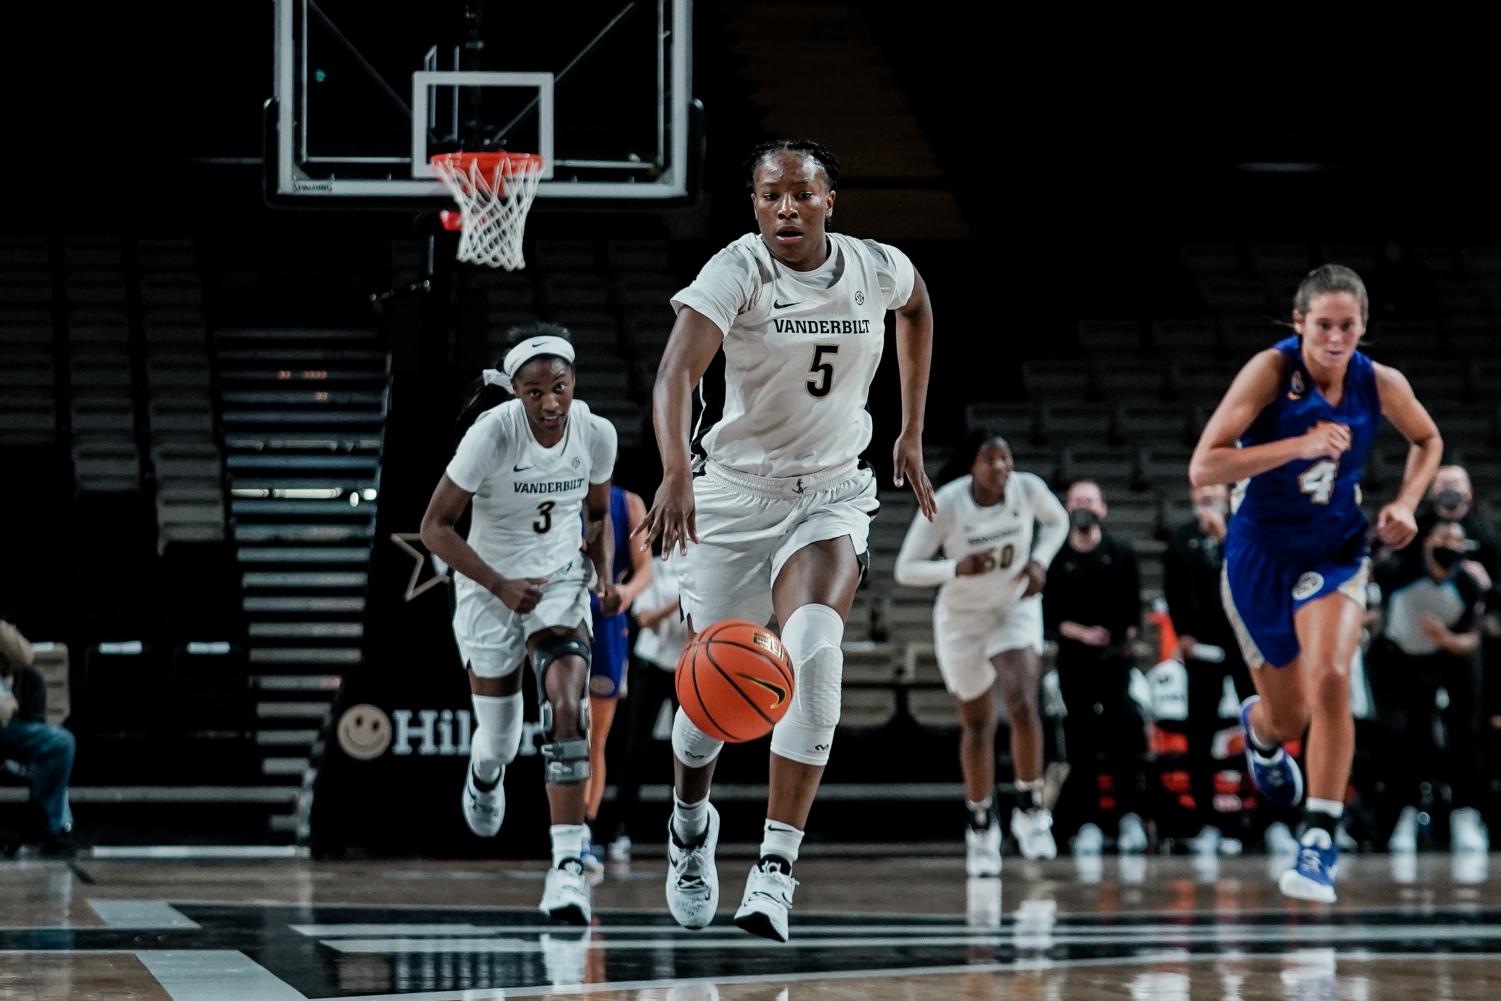 Yaubryon Chambers dribbles up the court during a game in 2020.